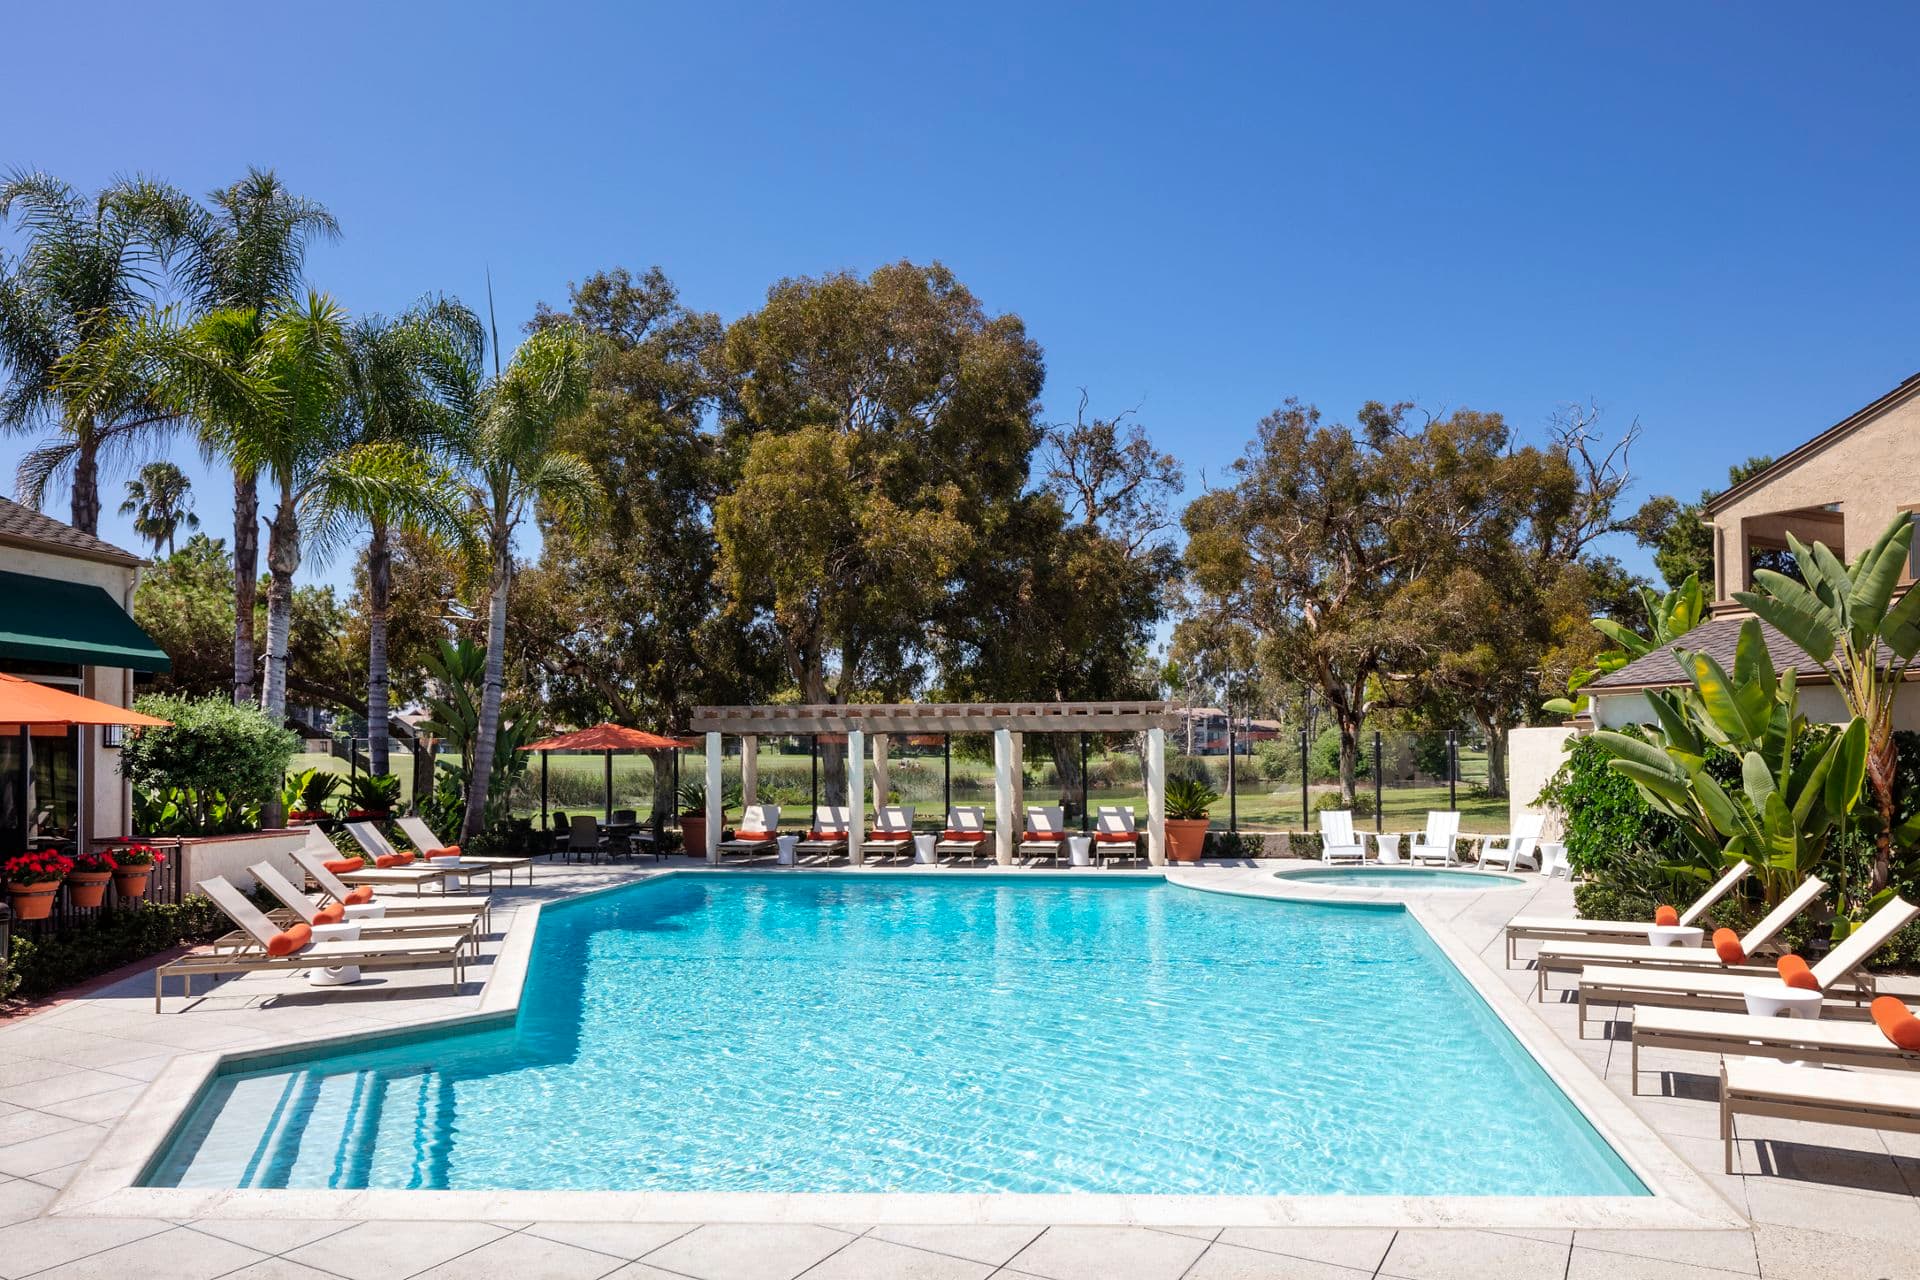 Pool view at Rancho San Joaquin Apartment Homes in Irvine, CA.